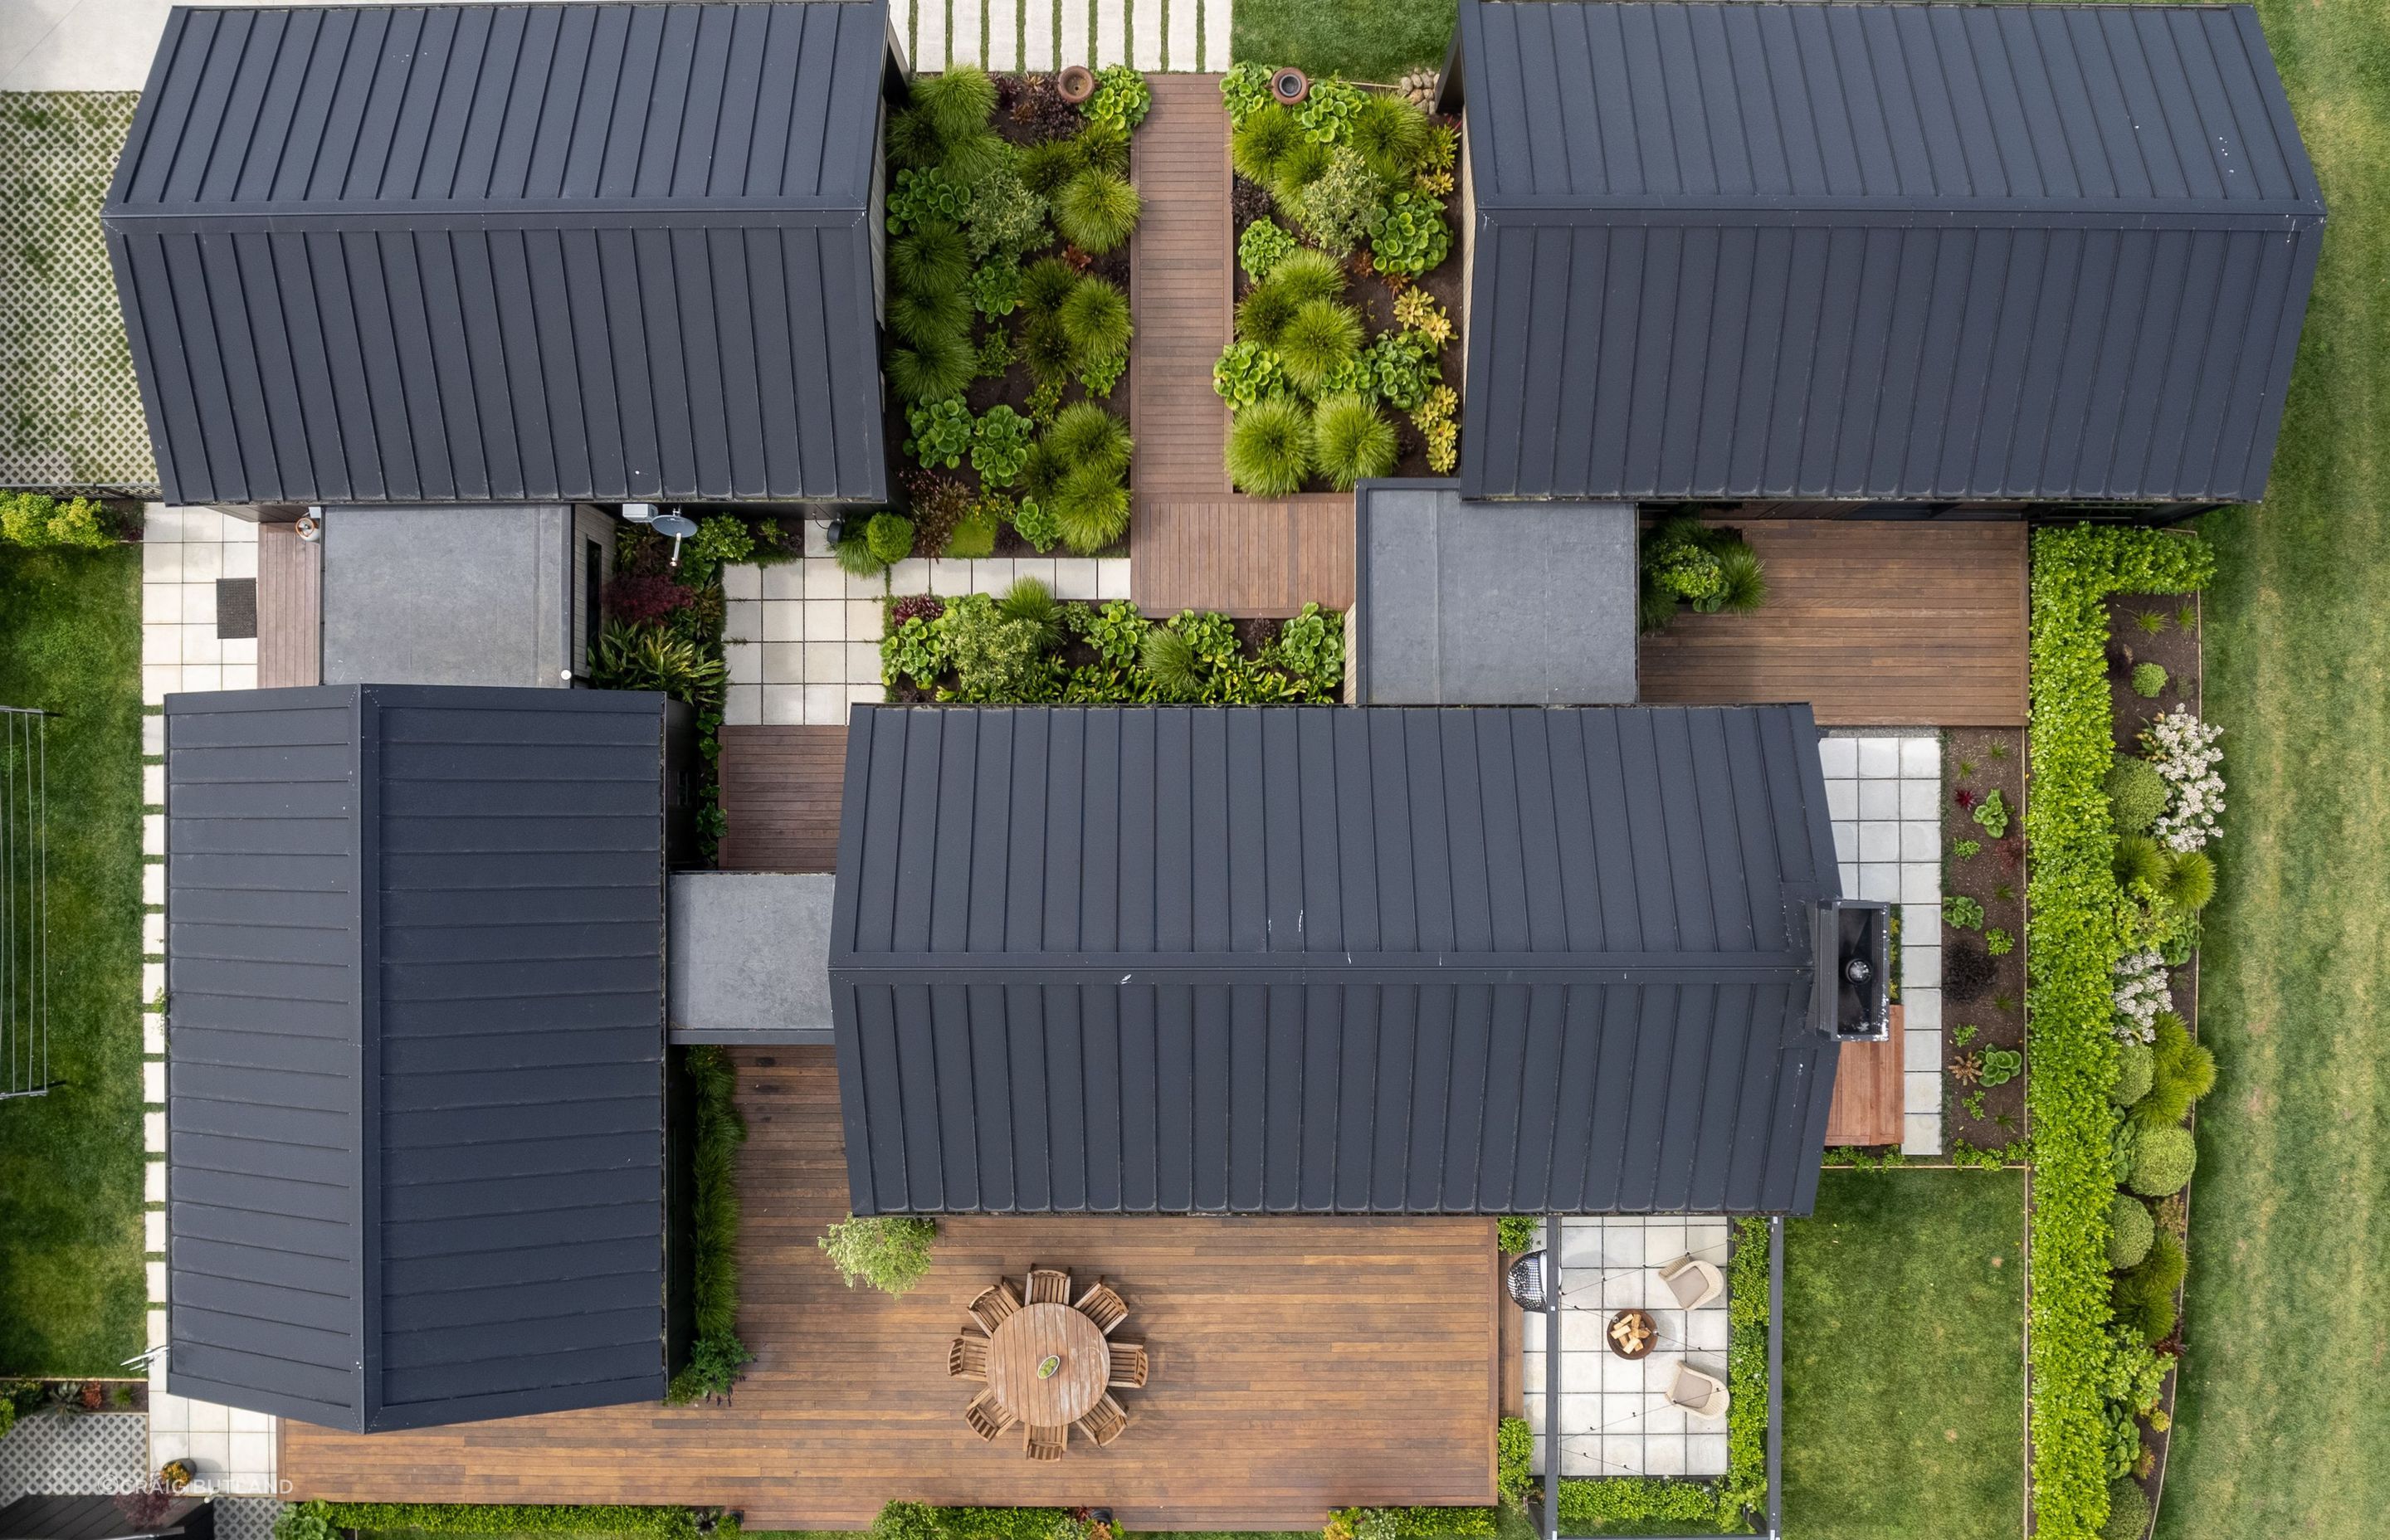 The modular layout creates several options for sheltered courtyards on all sides of the house connected by glazed walkways, bringing the outdoors in.